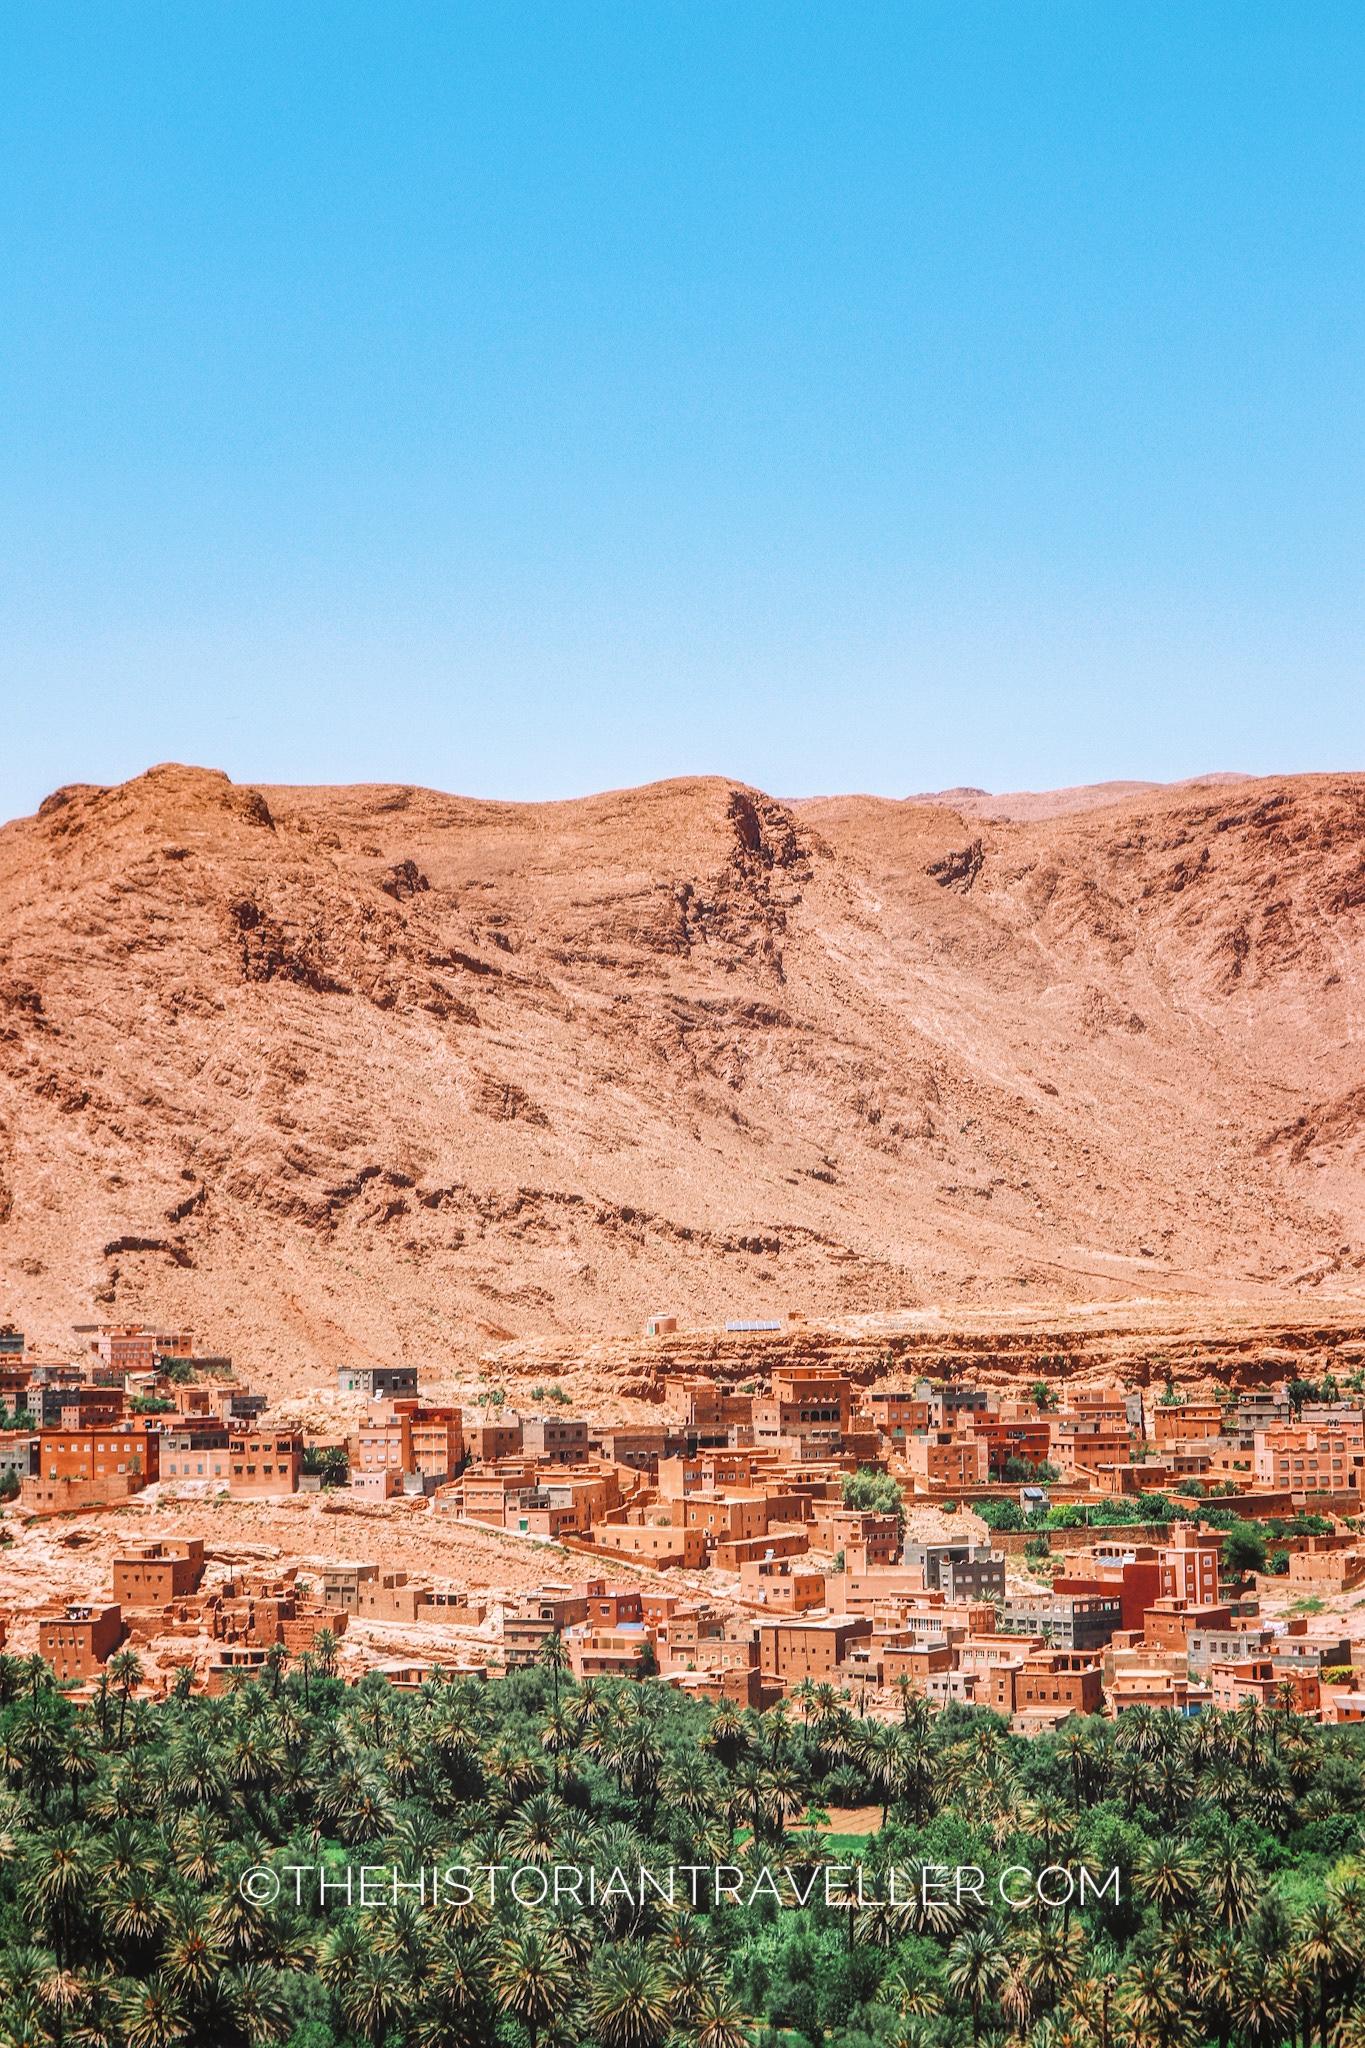 Road of Thousand Kasbahs itinerary -  Driving the High Atlas Mountains, villages and roads from our road trip